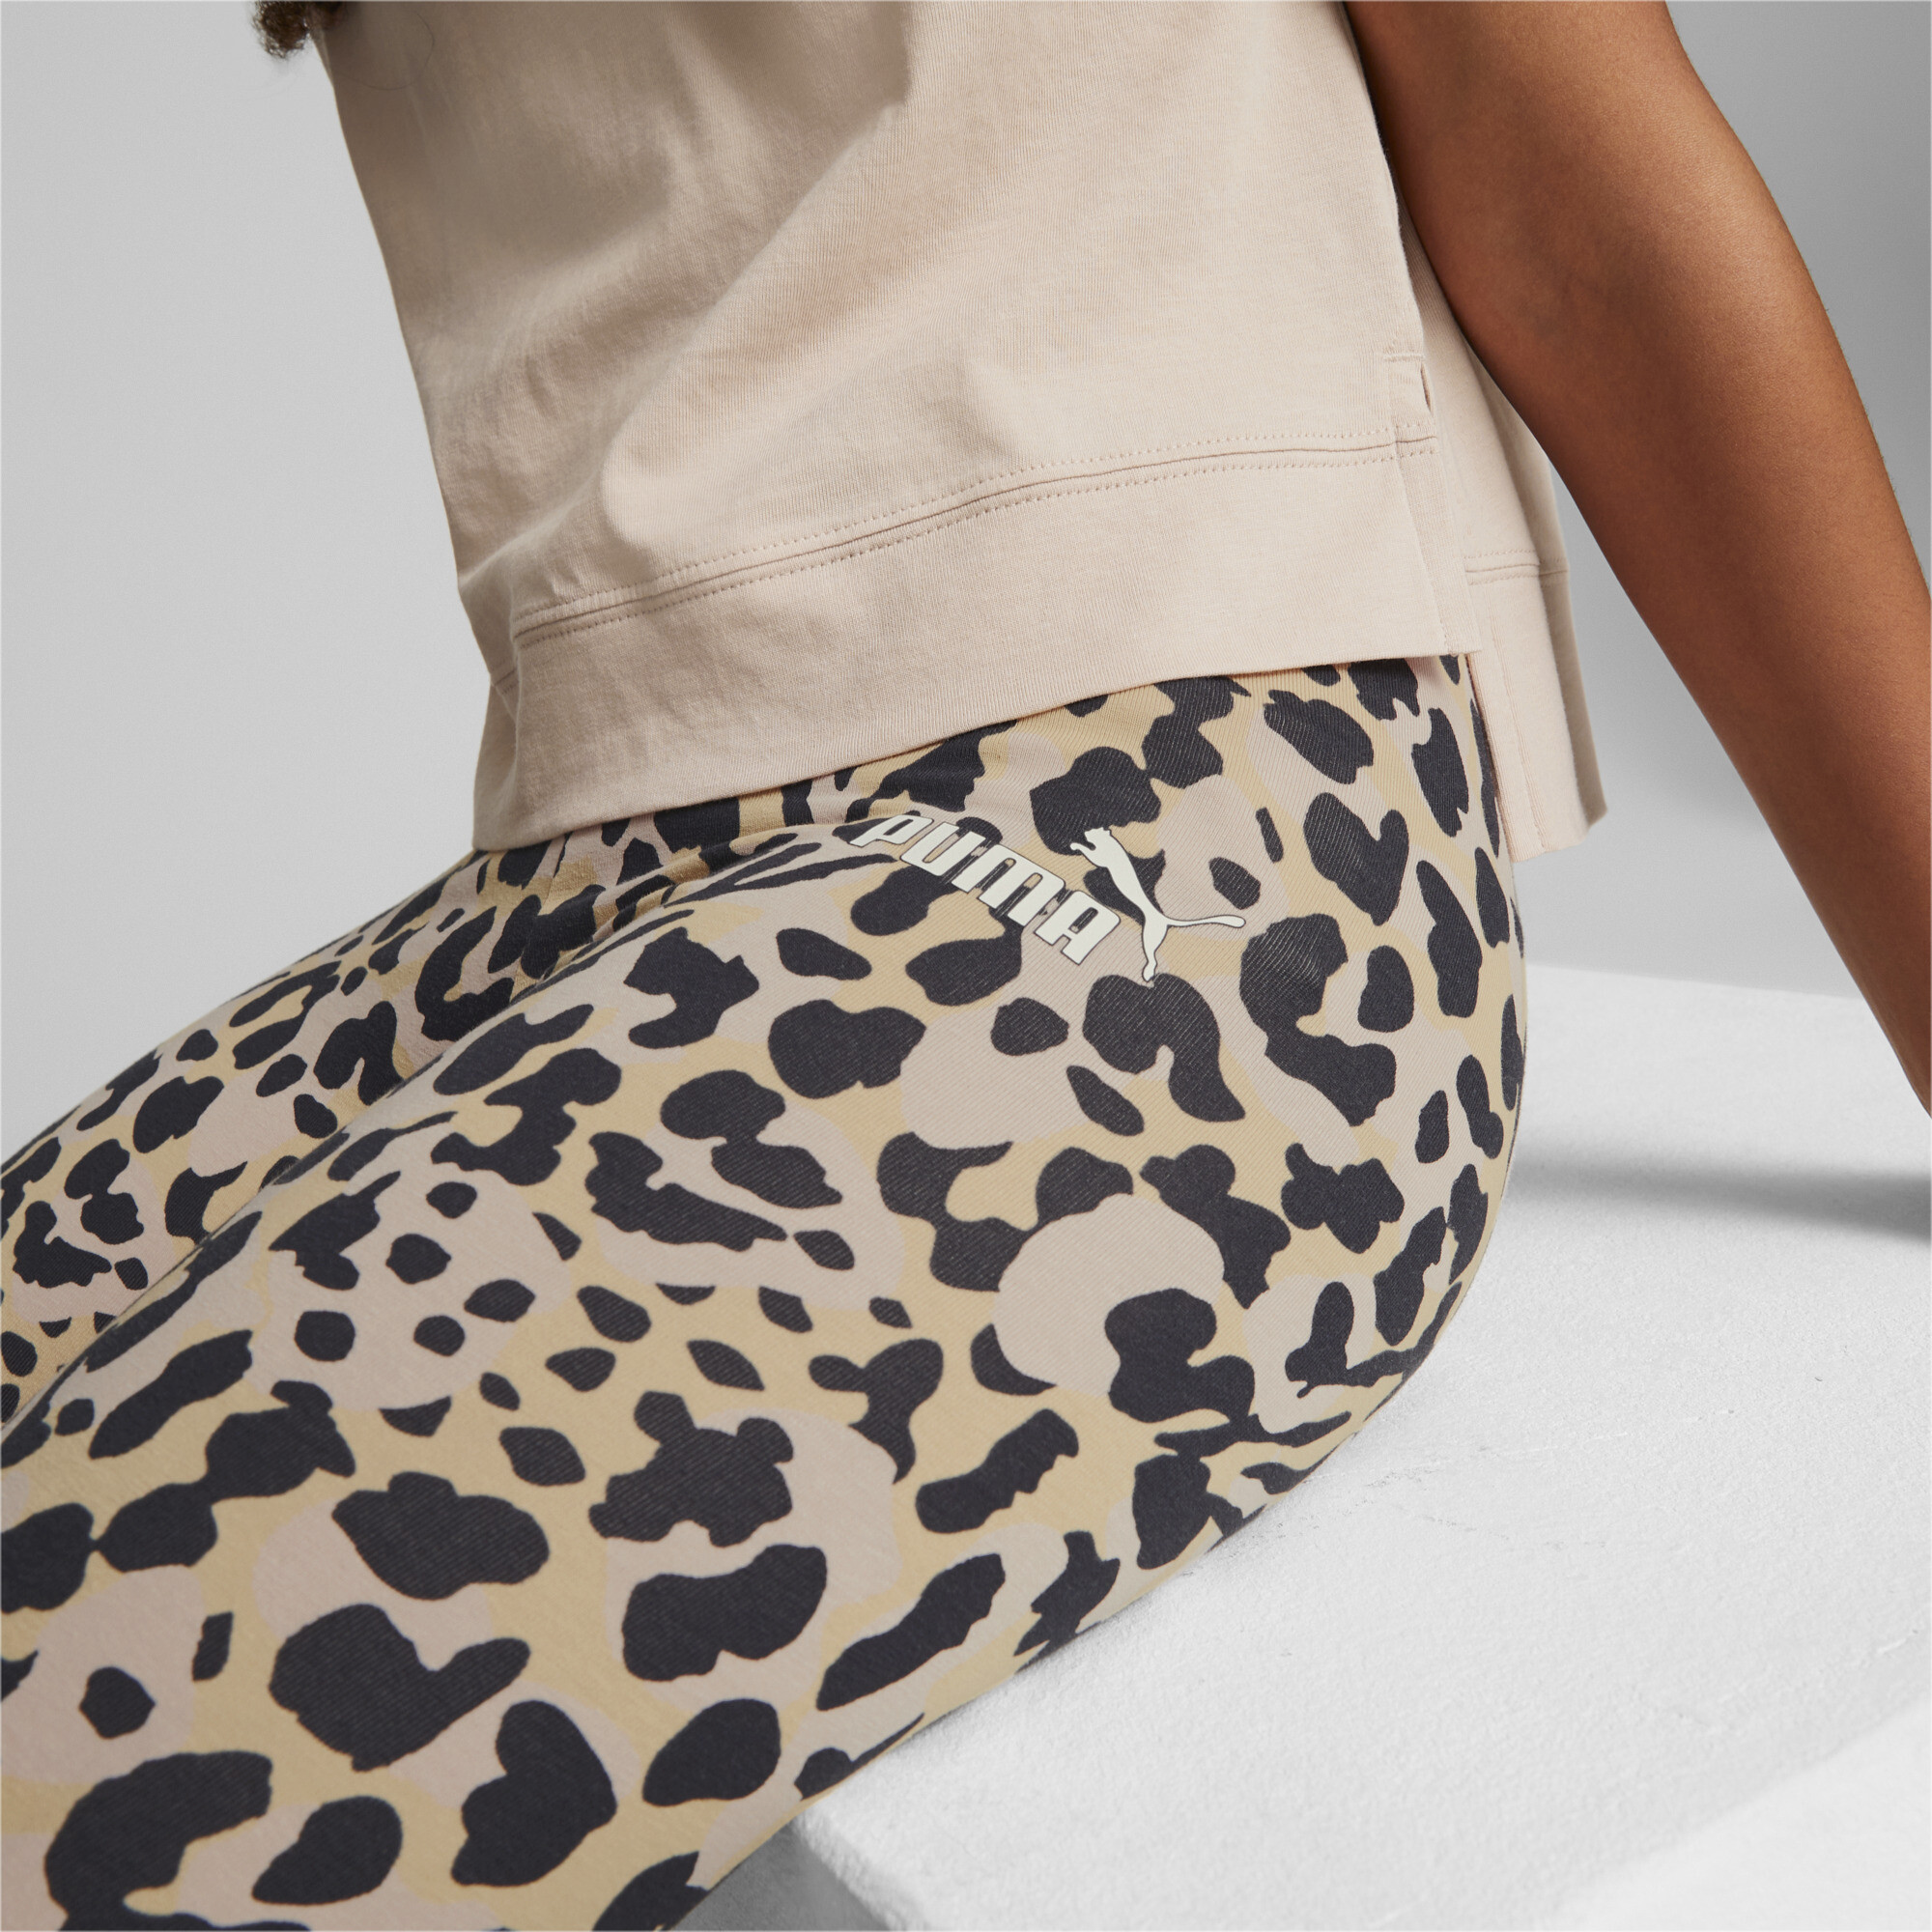 PUMA Alpha Printed Leggings In Pink, Size 13-14 Youth